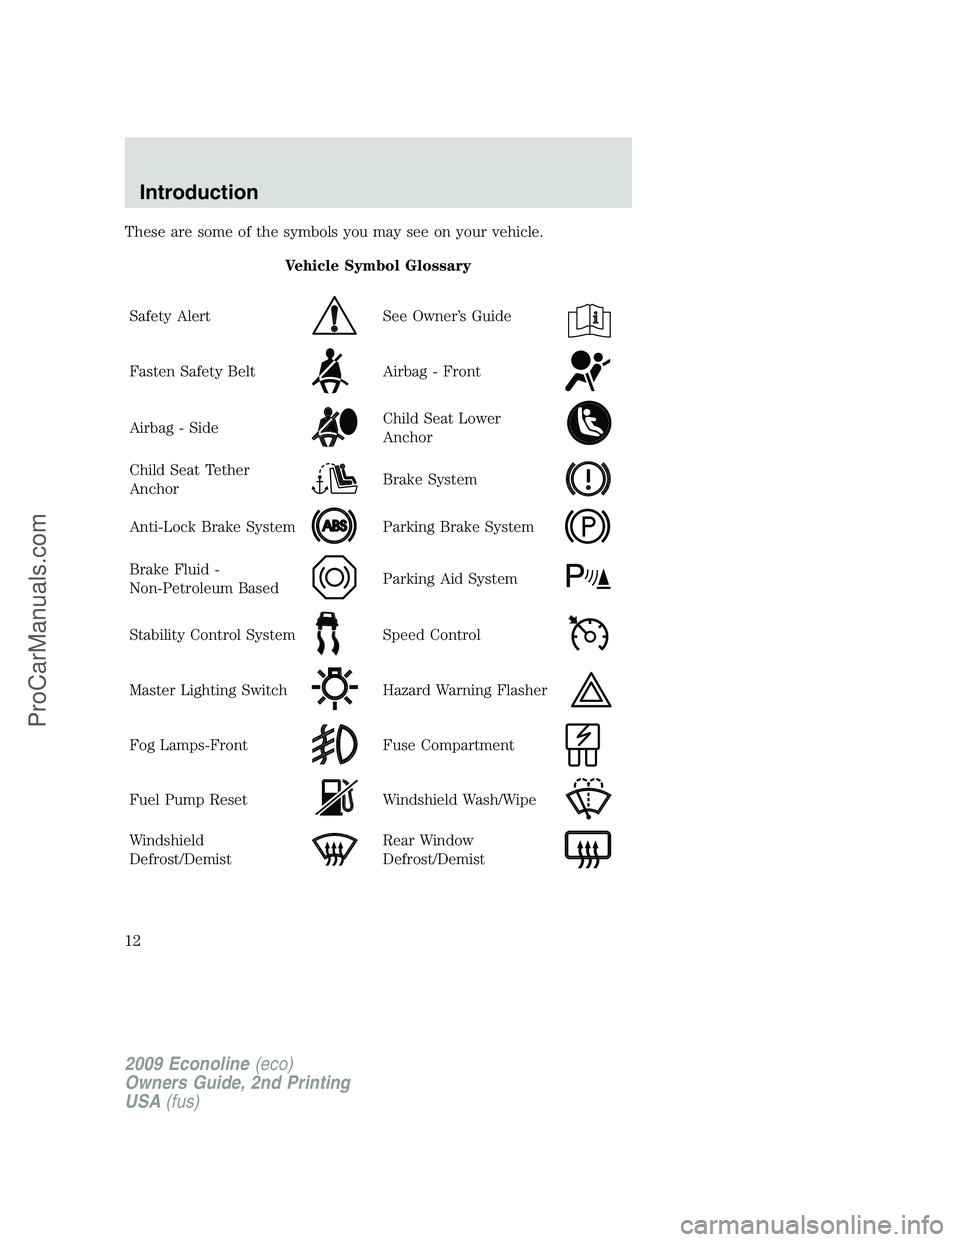 FORD ECONOLINE 2009  Owners Manual These are some of the symbols you may see on your vehicle.
Vehicle Symbol Glossary
Safety Alert
See Owner’s Guide
Fasten Safety BeltAirbag - Front
Airbag - SideChild Seat Lower
Anchor
Child Seat Tet